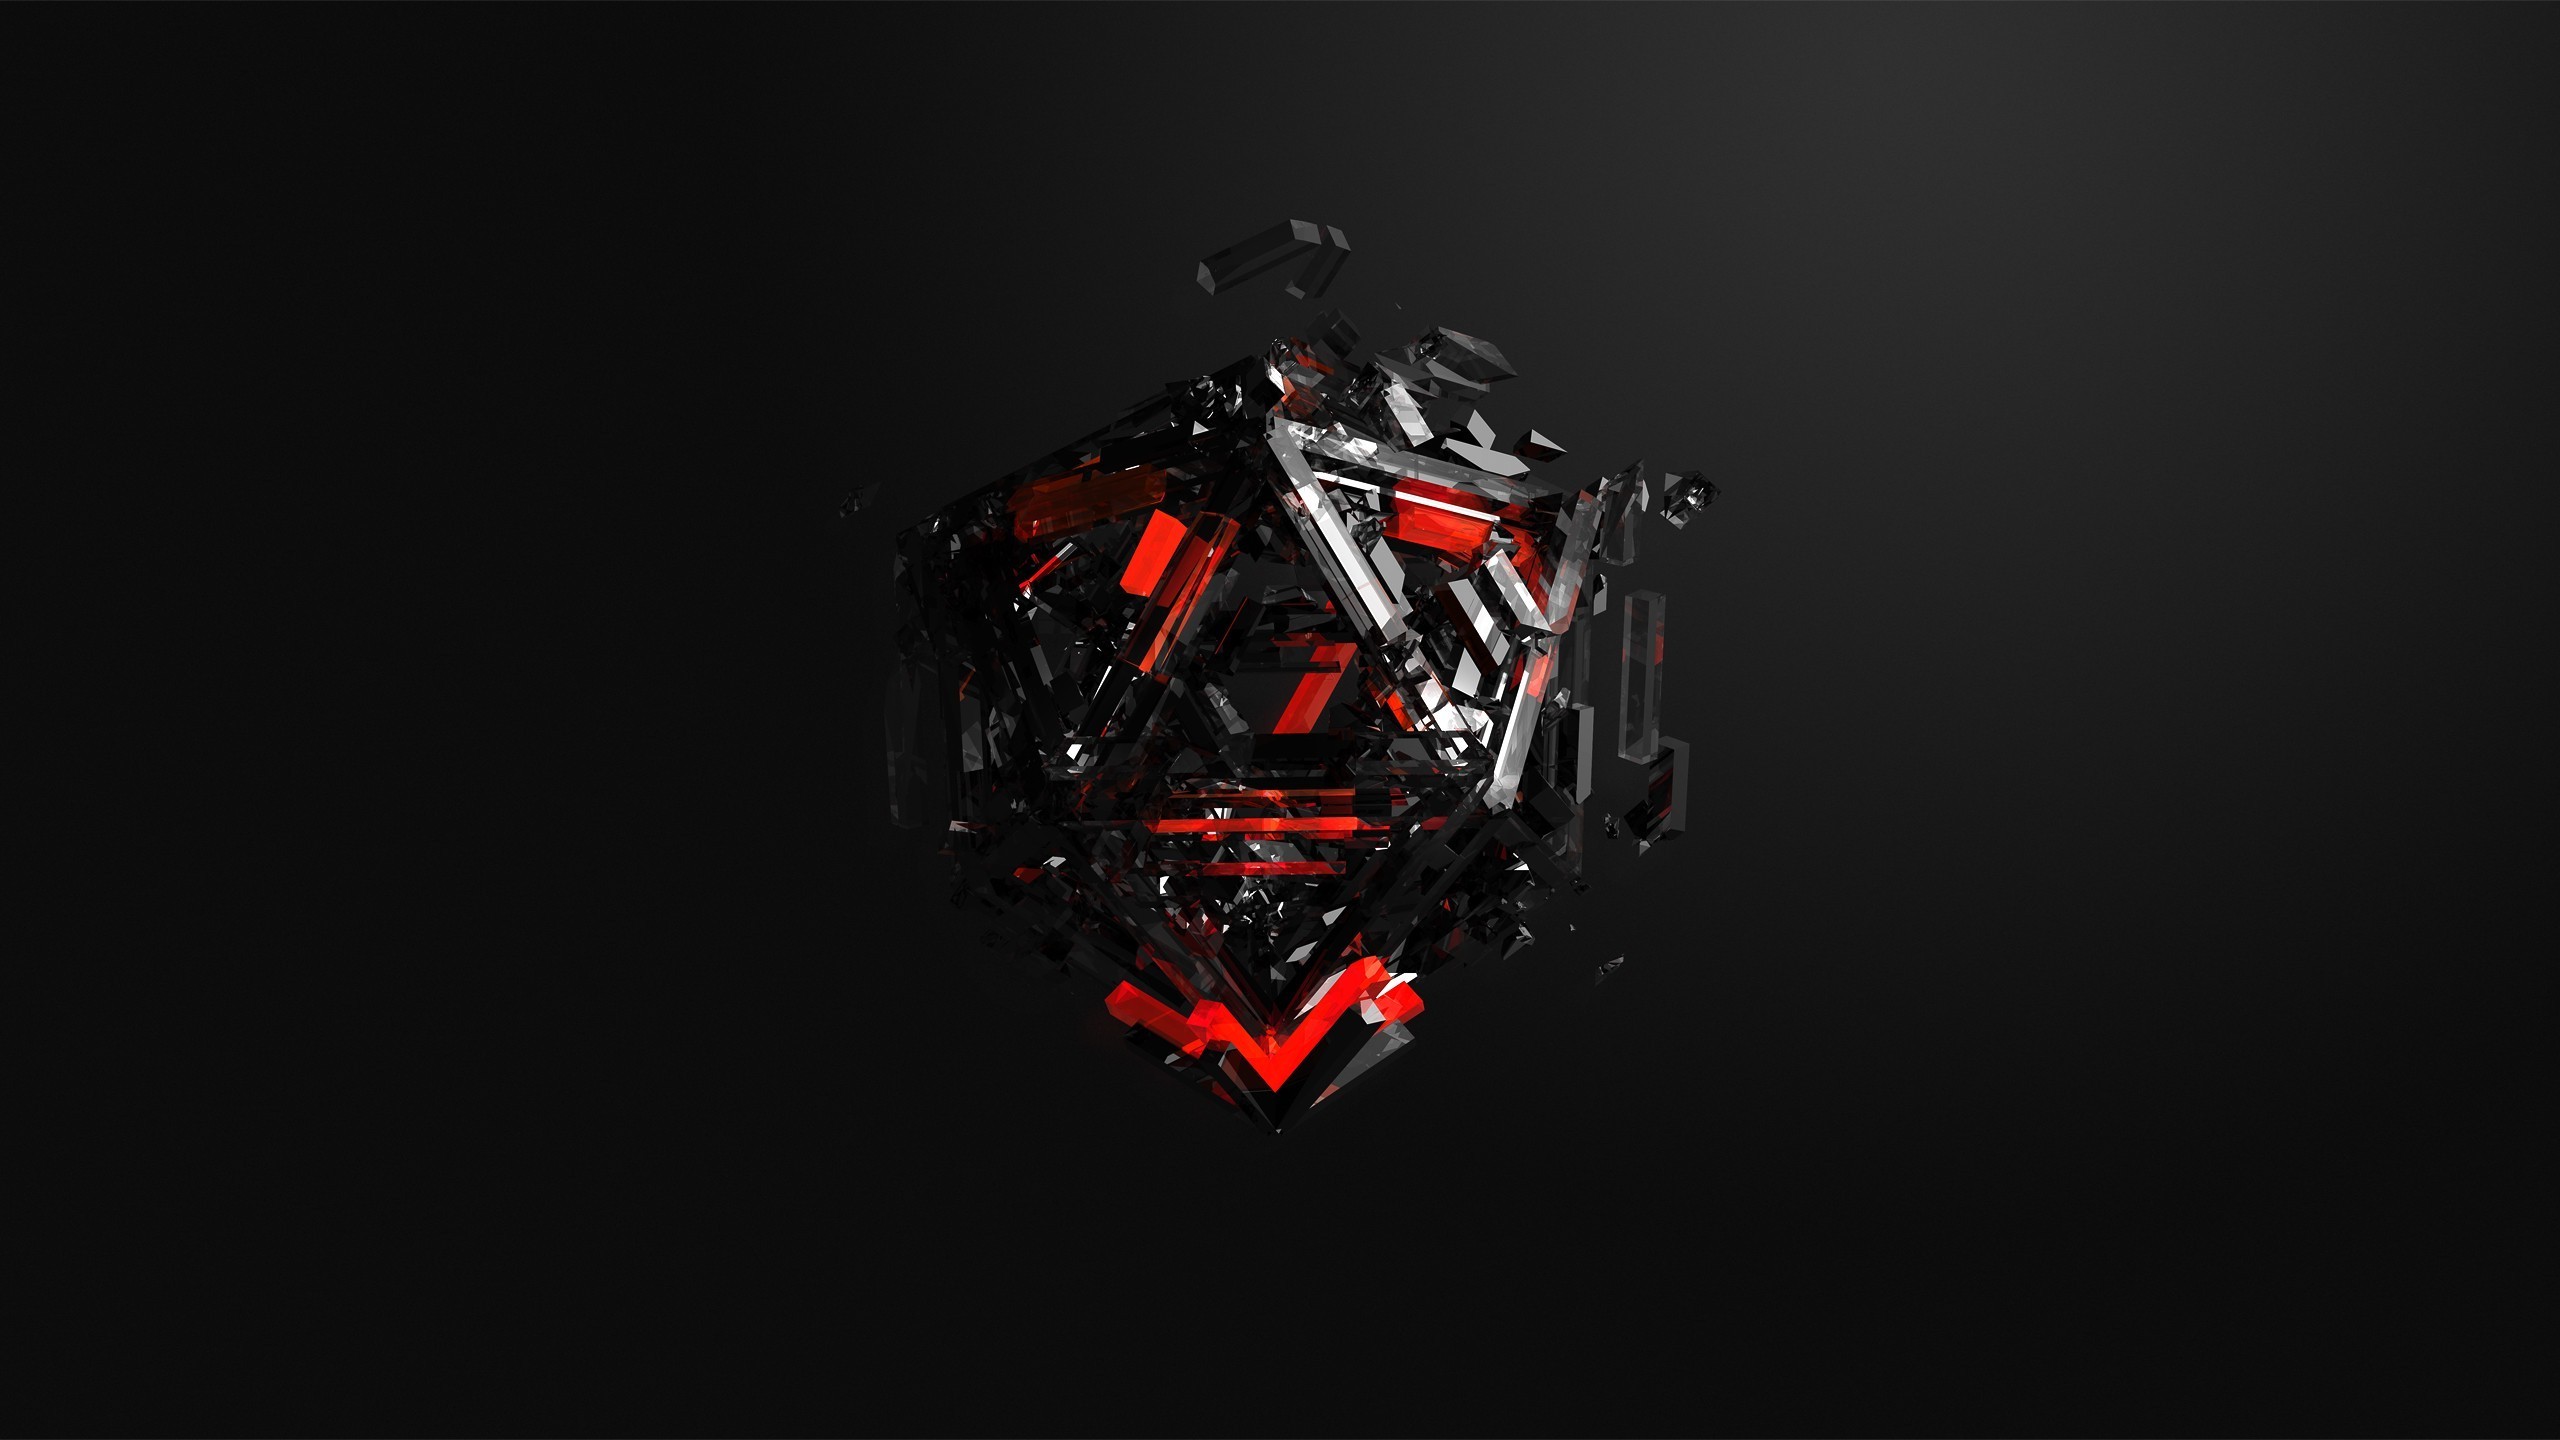 Red And Black Wallpaper 4k Pc Red Abstract Wallpaper 4k Imgurl Bmp My